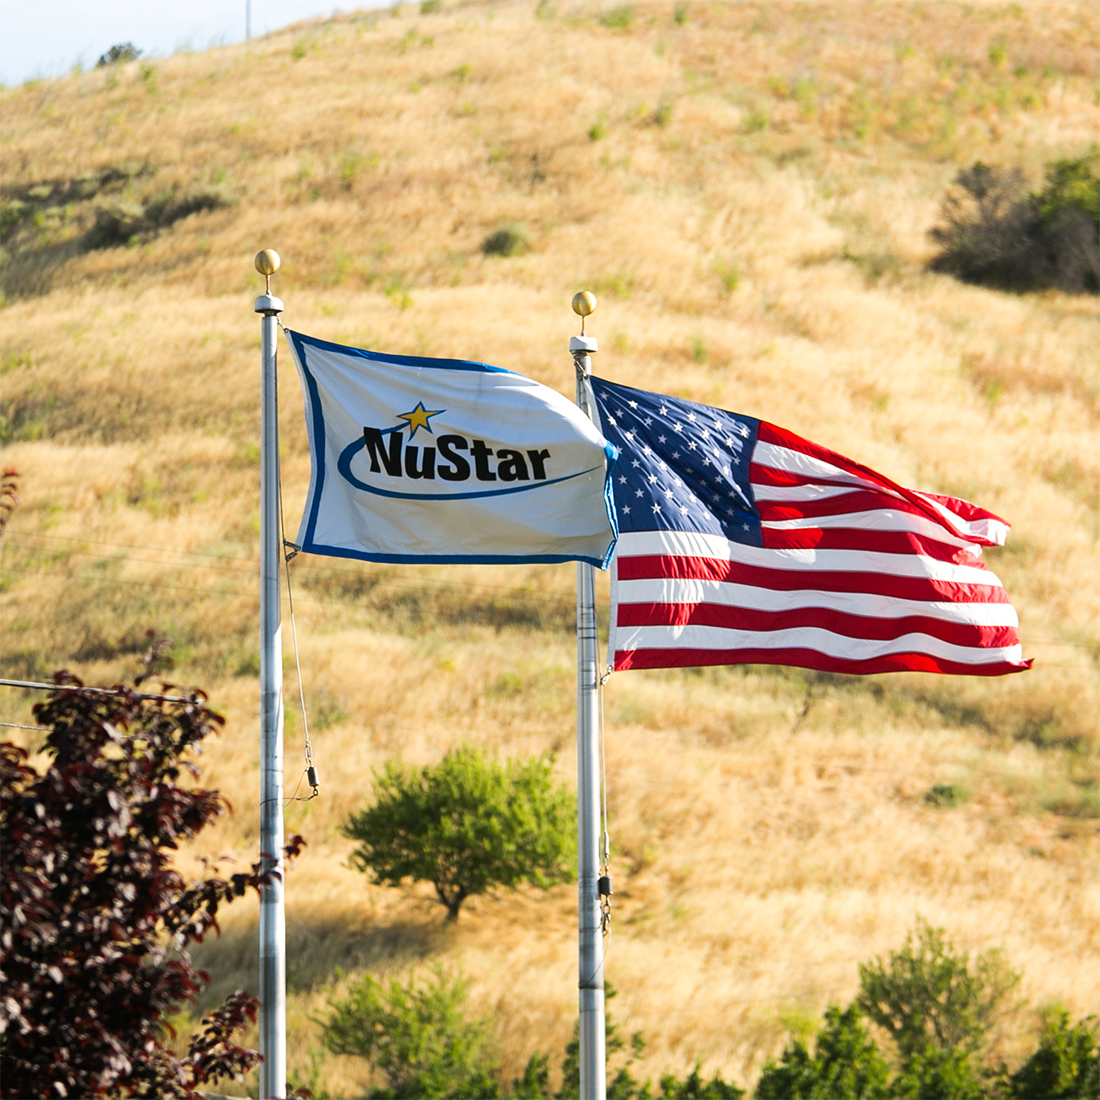 Image of an American flag and the NuStar logo flag.